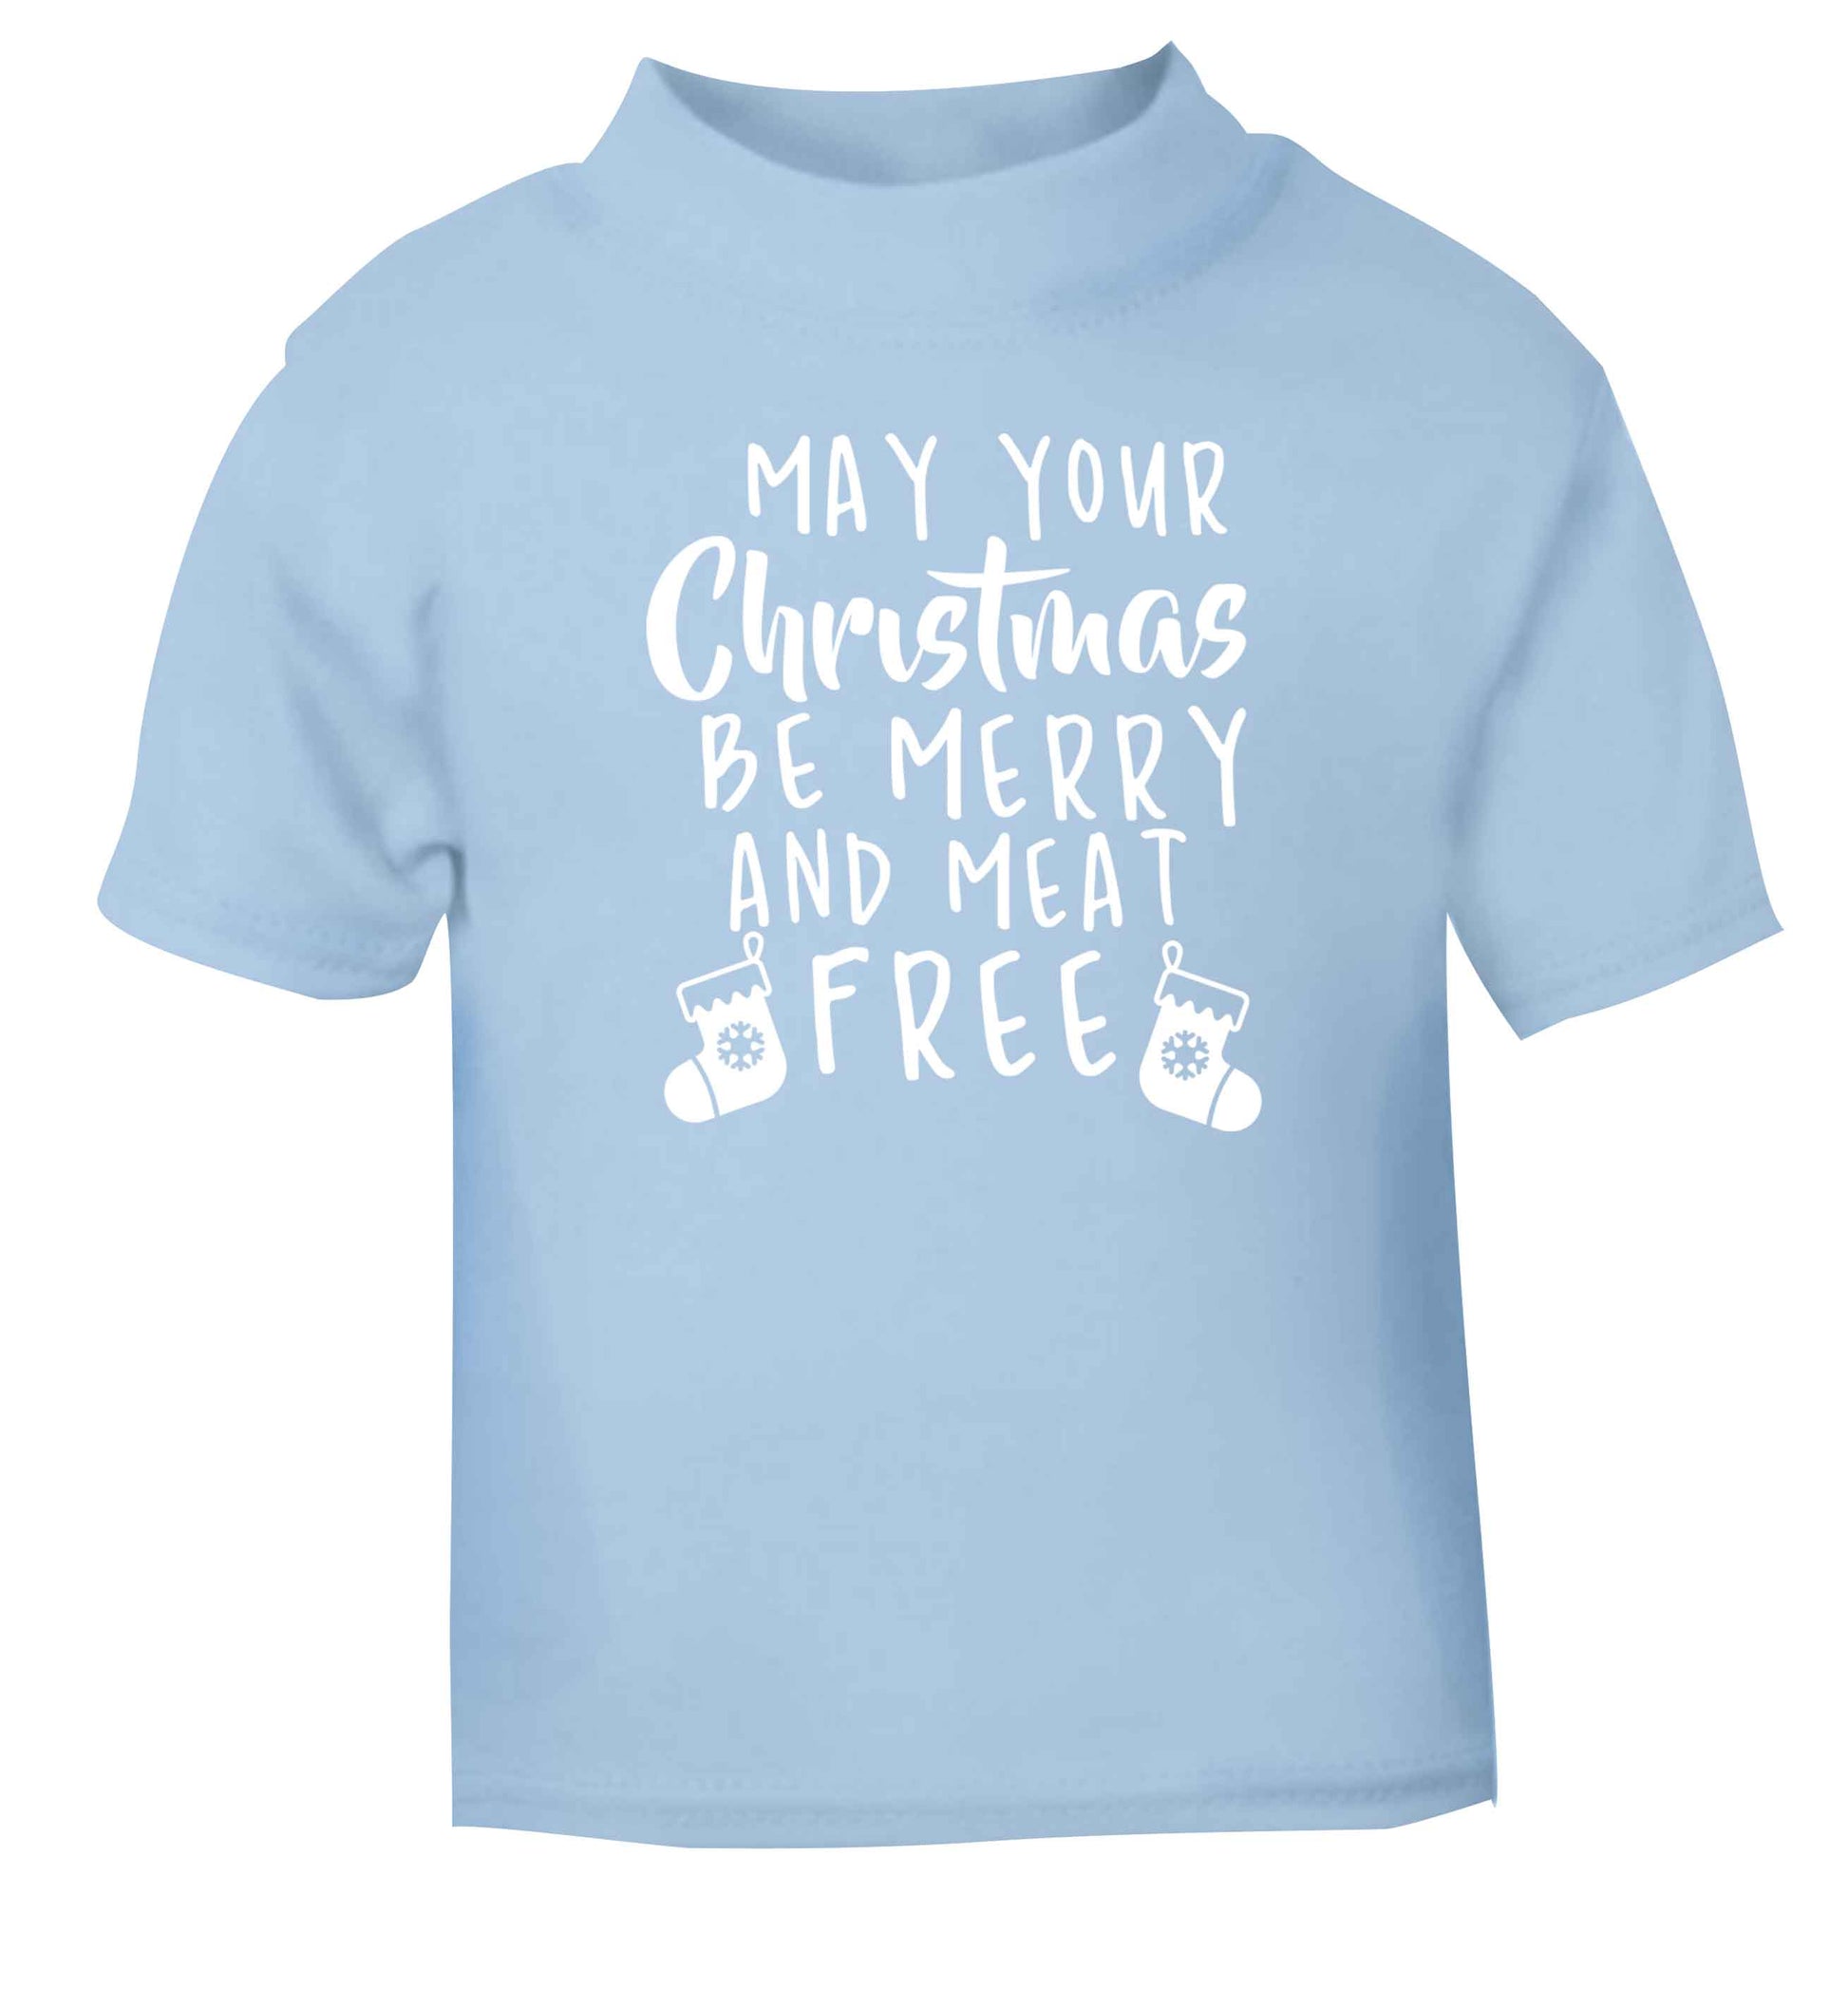 May your Christmas be merry and meat free light blue Baby Toddler Tshirt 2 Years